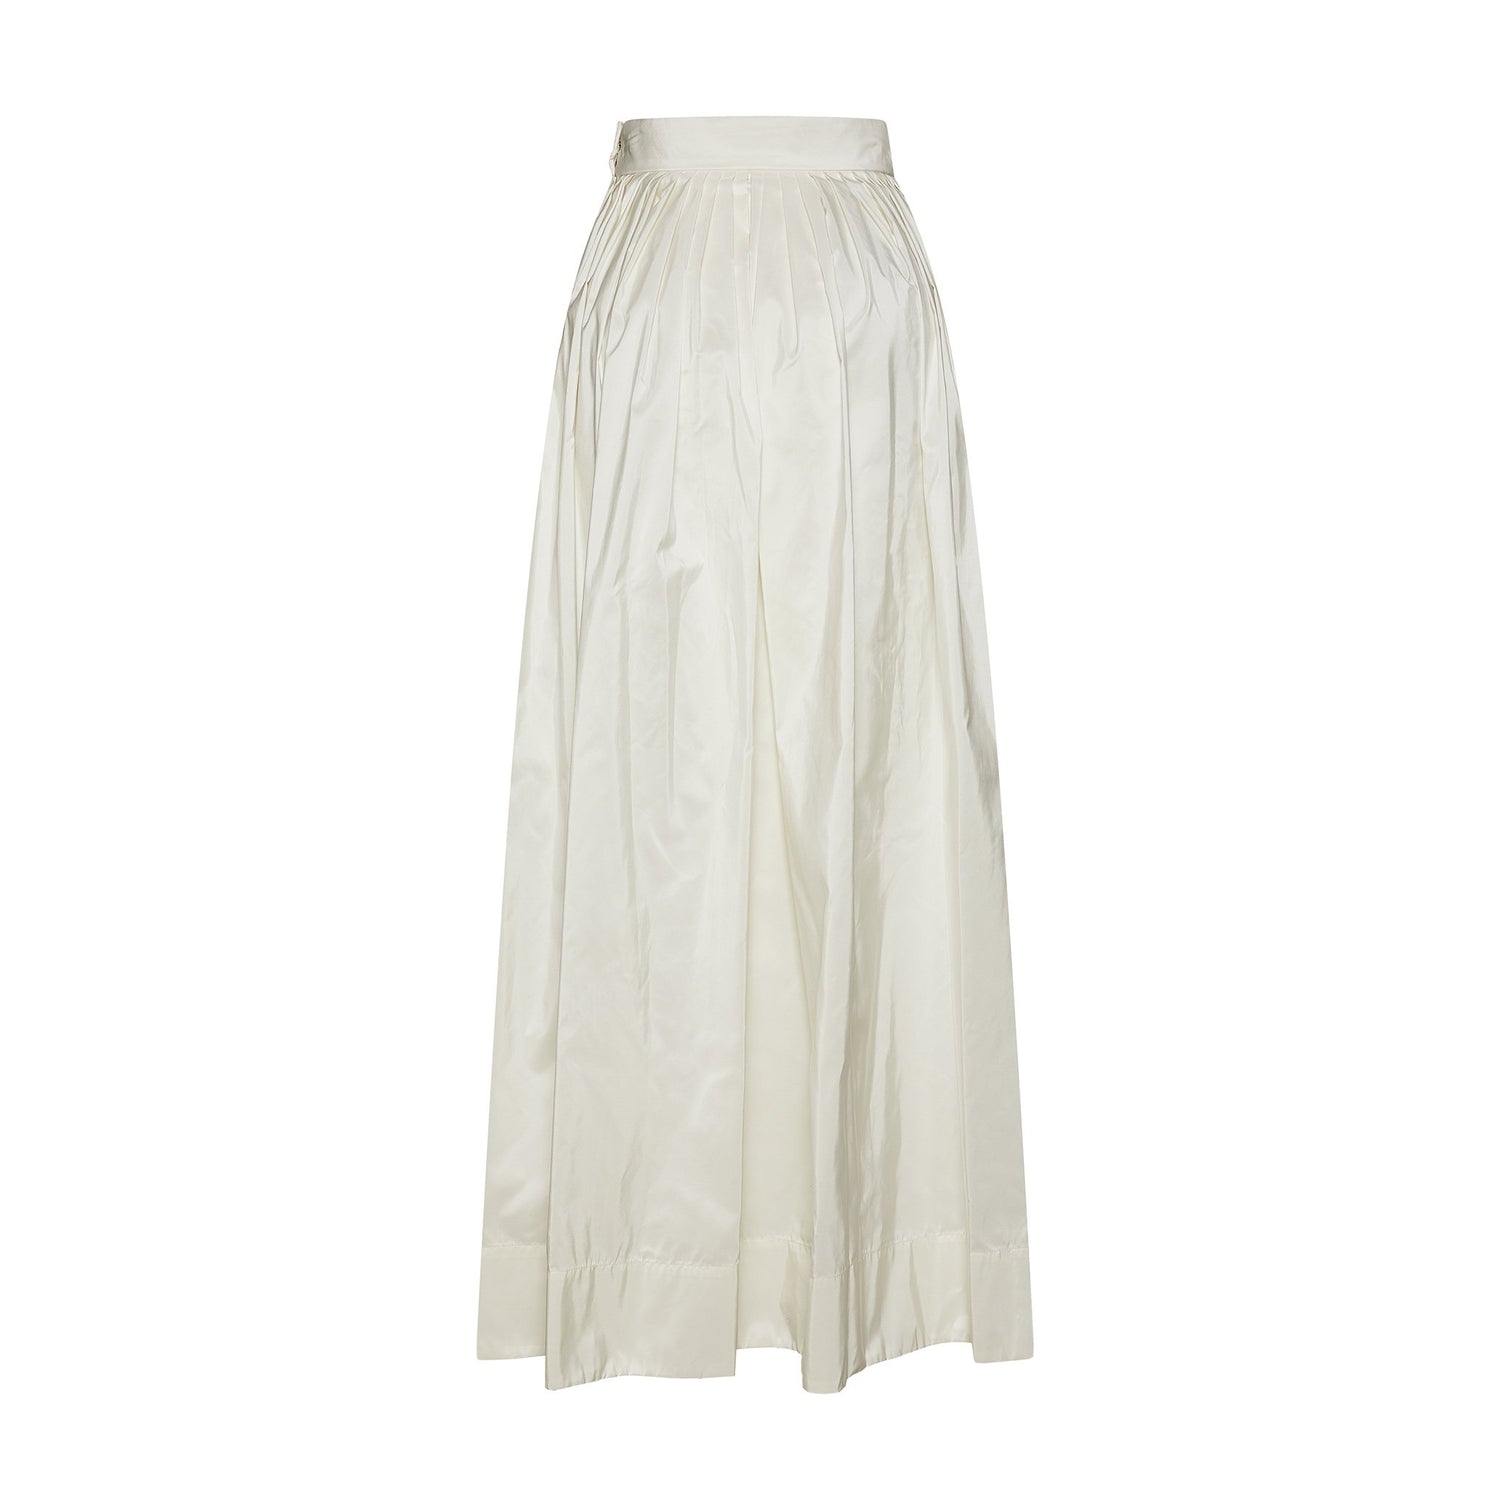 Womens White Tafeta Maxi Ball Skirt with cinched waist and pockets back